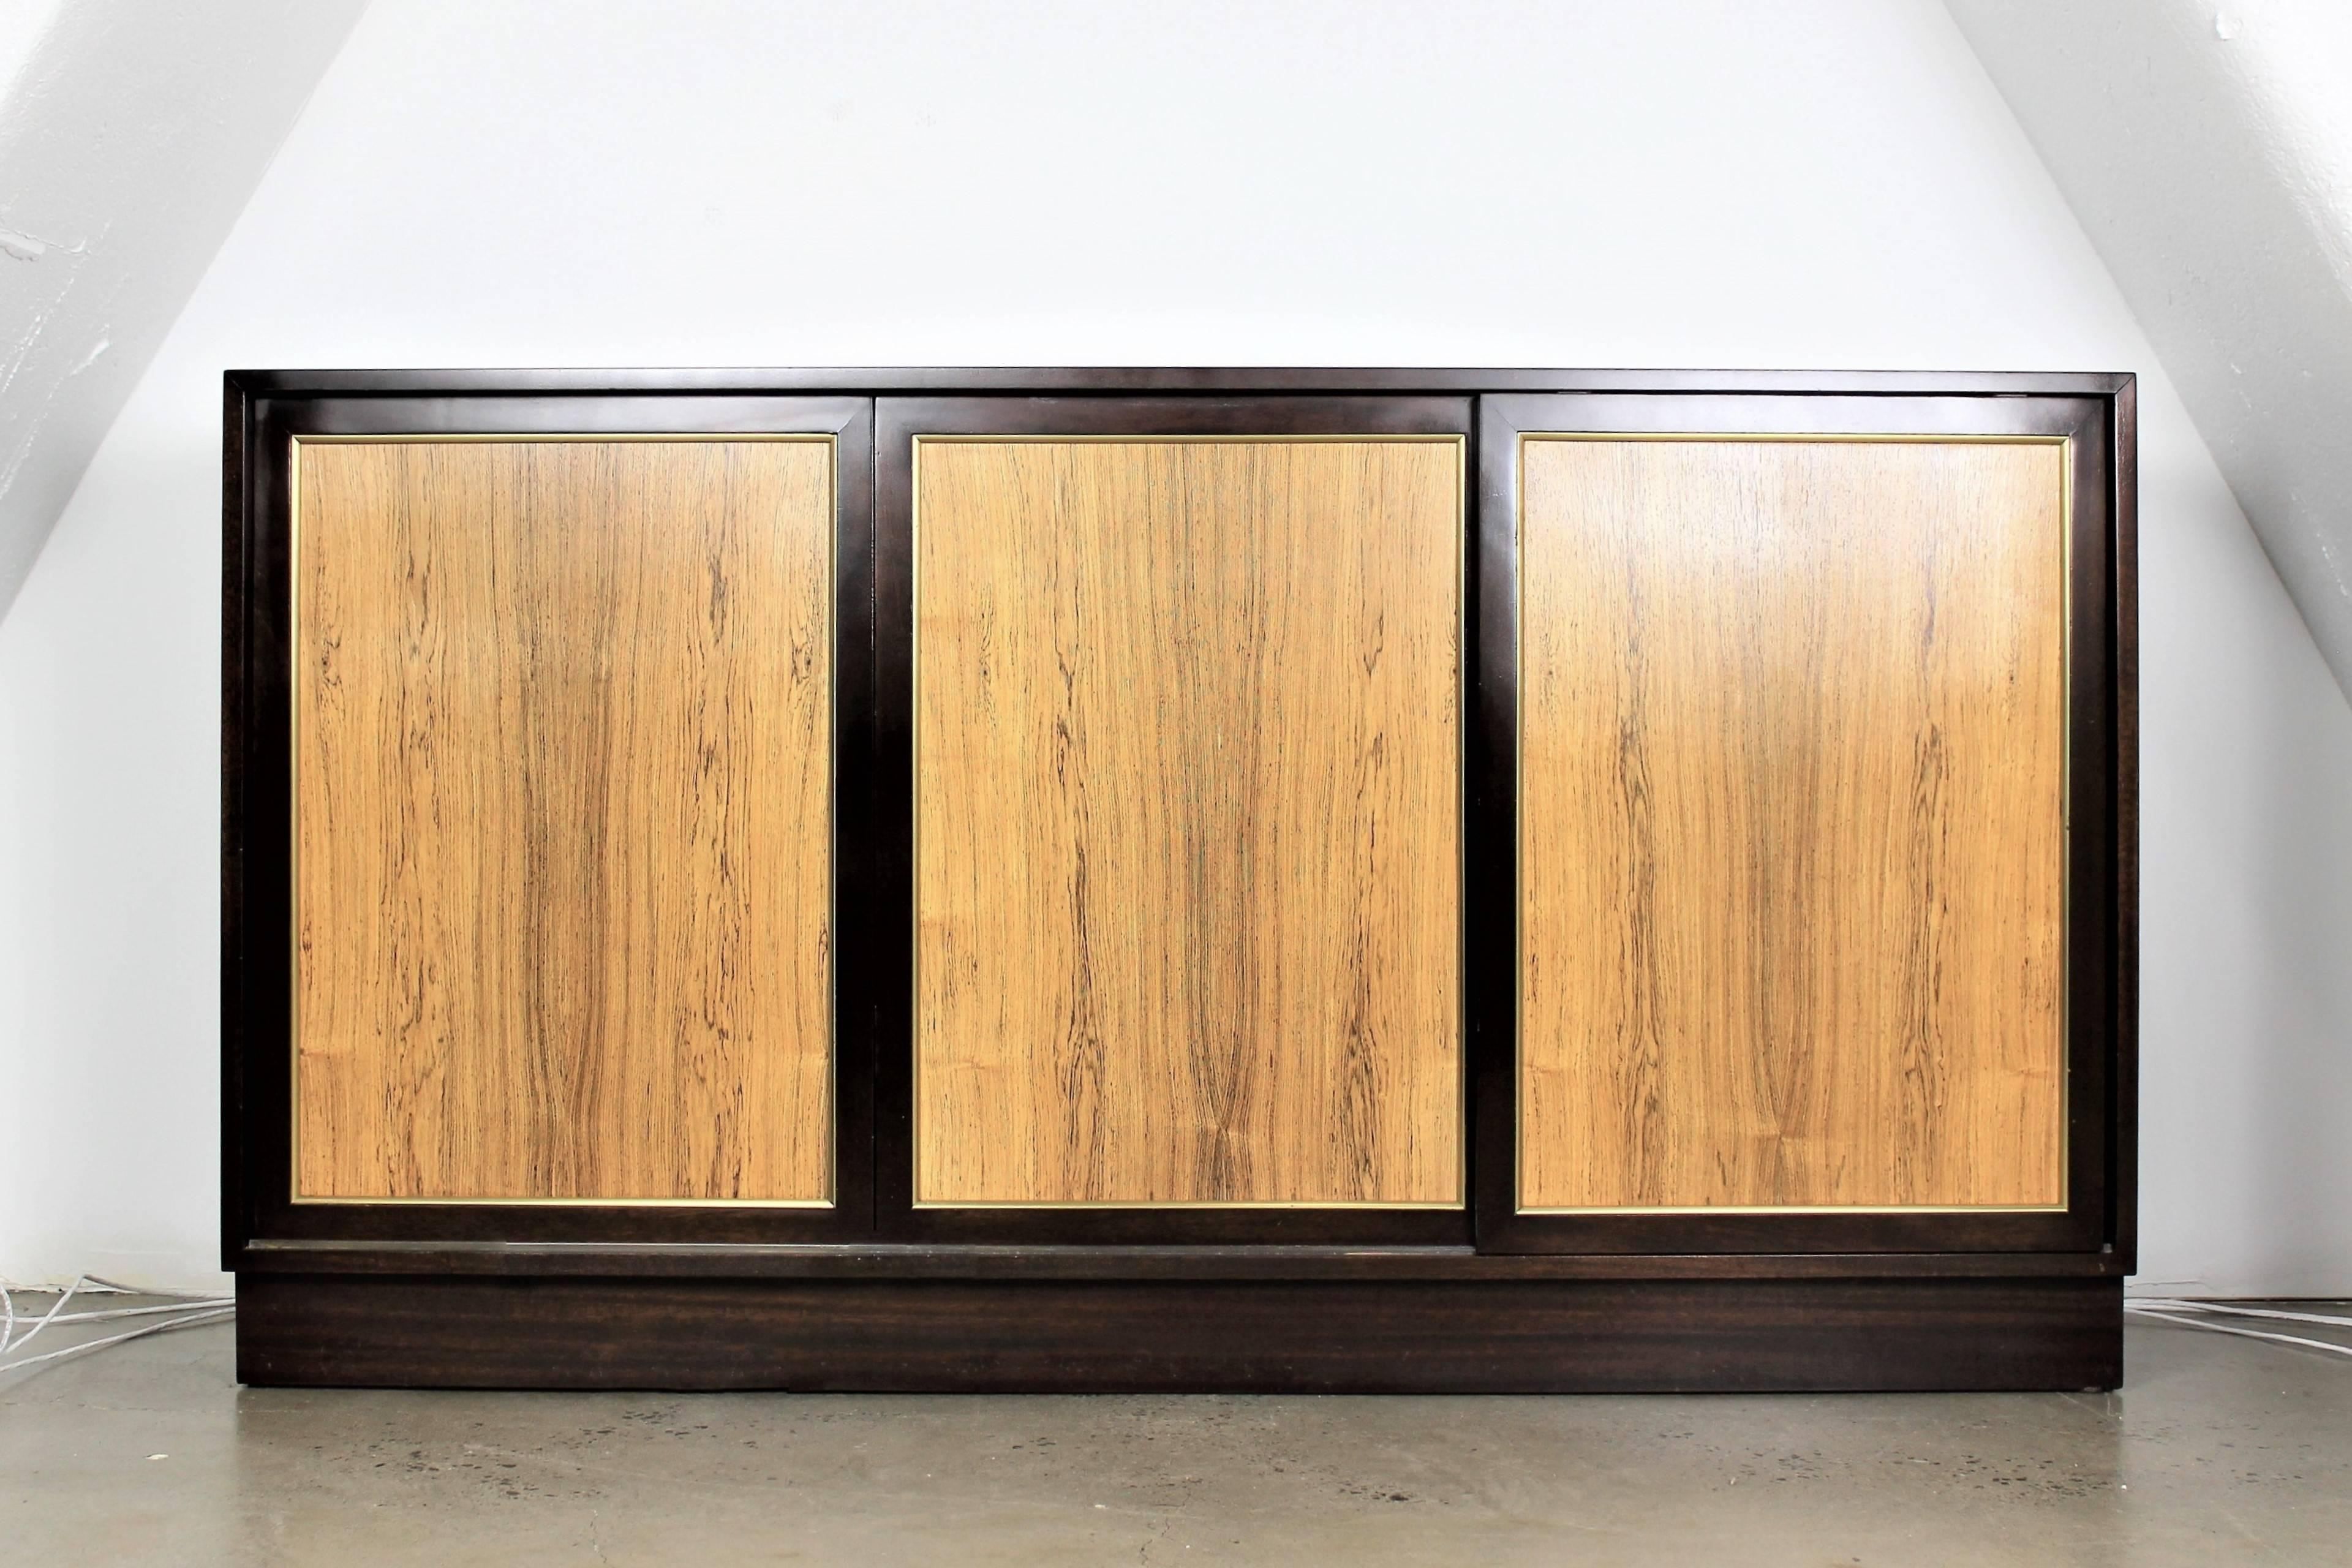 Dresser or Buffet by Harvey Probber in dark mahogany with rosewood sliding doors, 1960s. Classic design and lots of storage. 
We had this piece fully restored when we purchased this estate (Hoboken, NJ mid-century estate of Probber pieces and